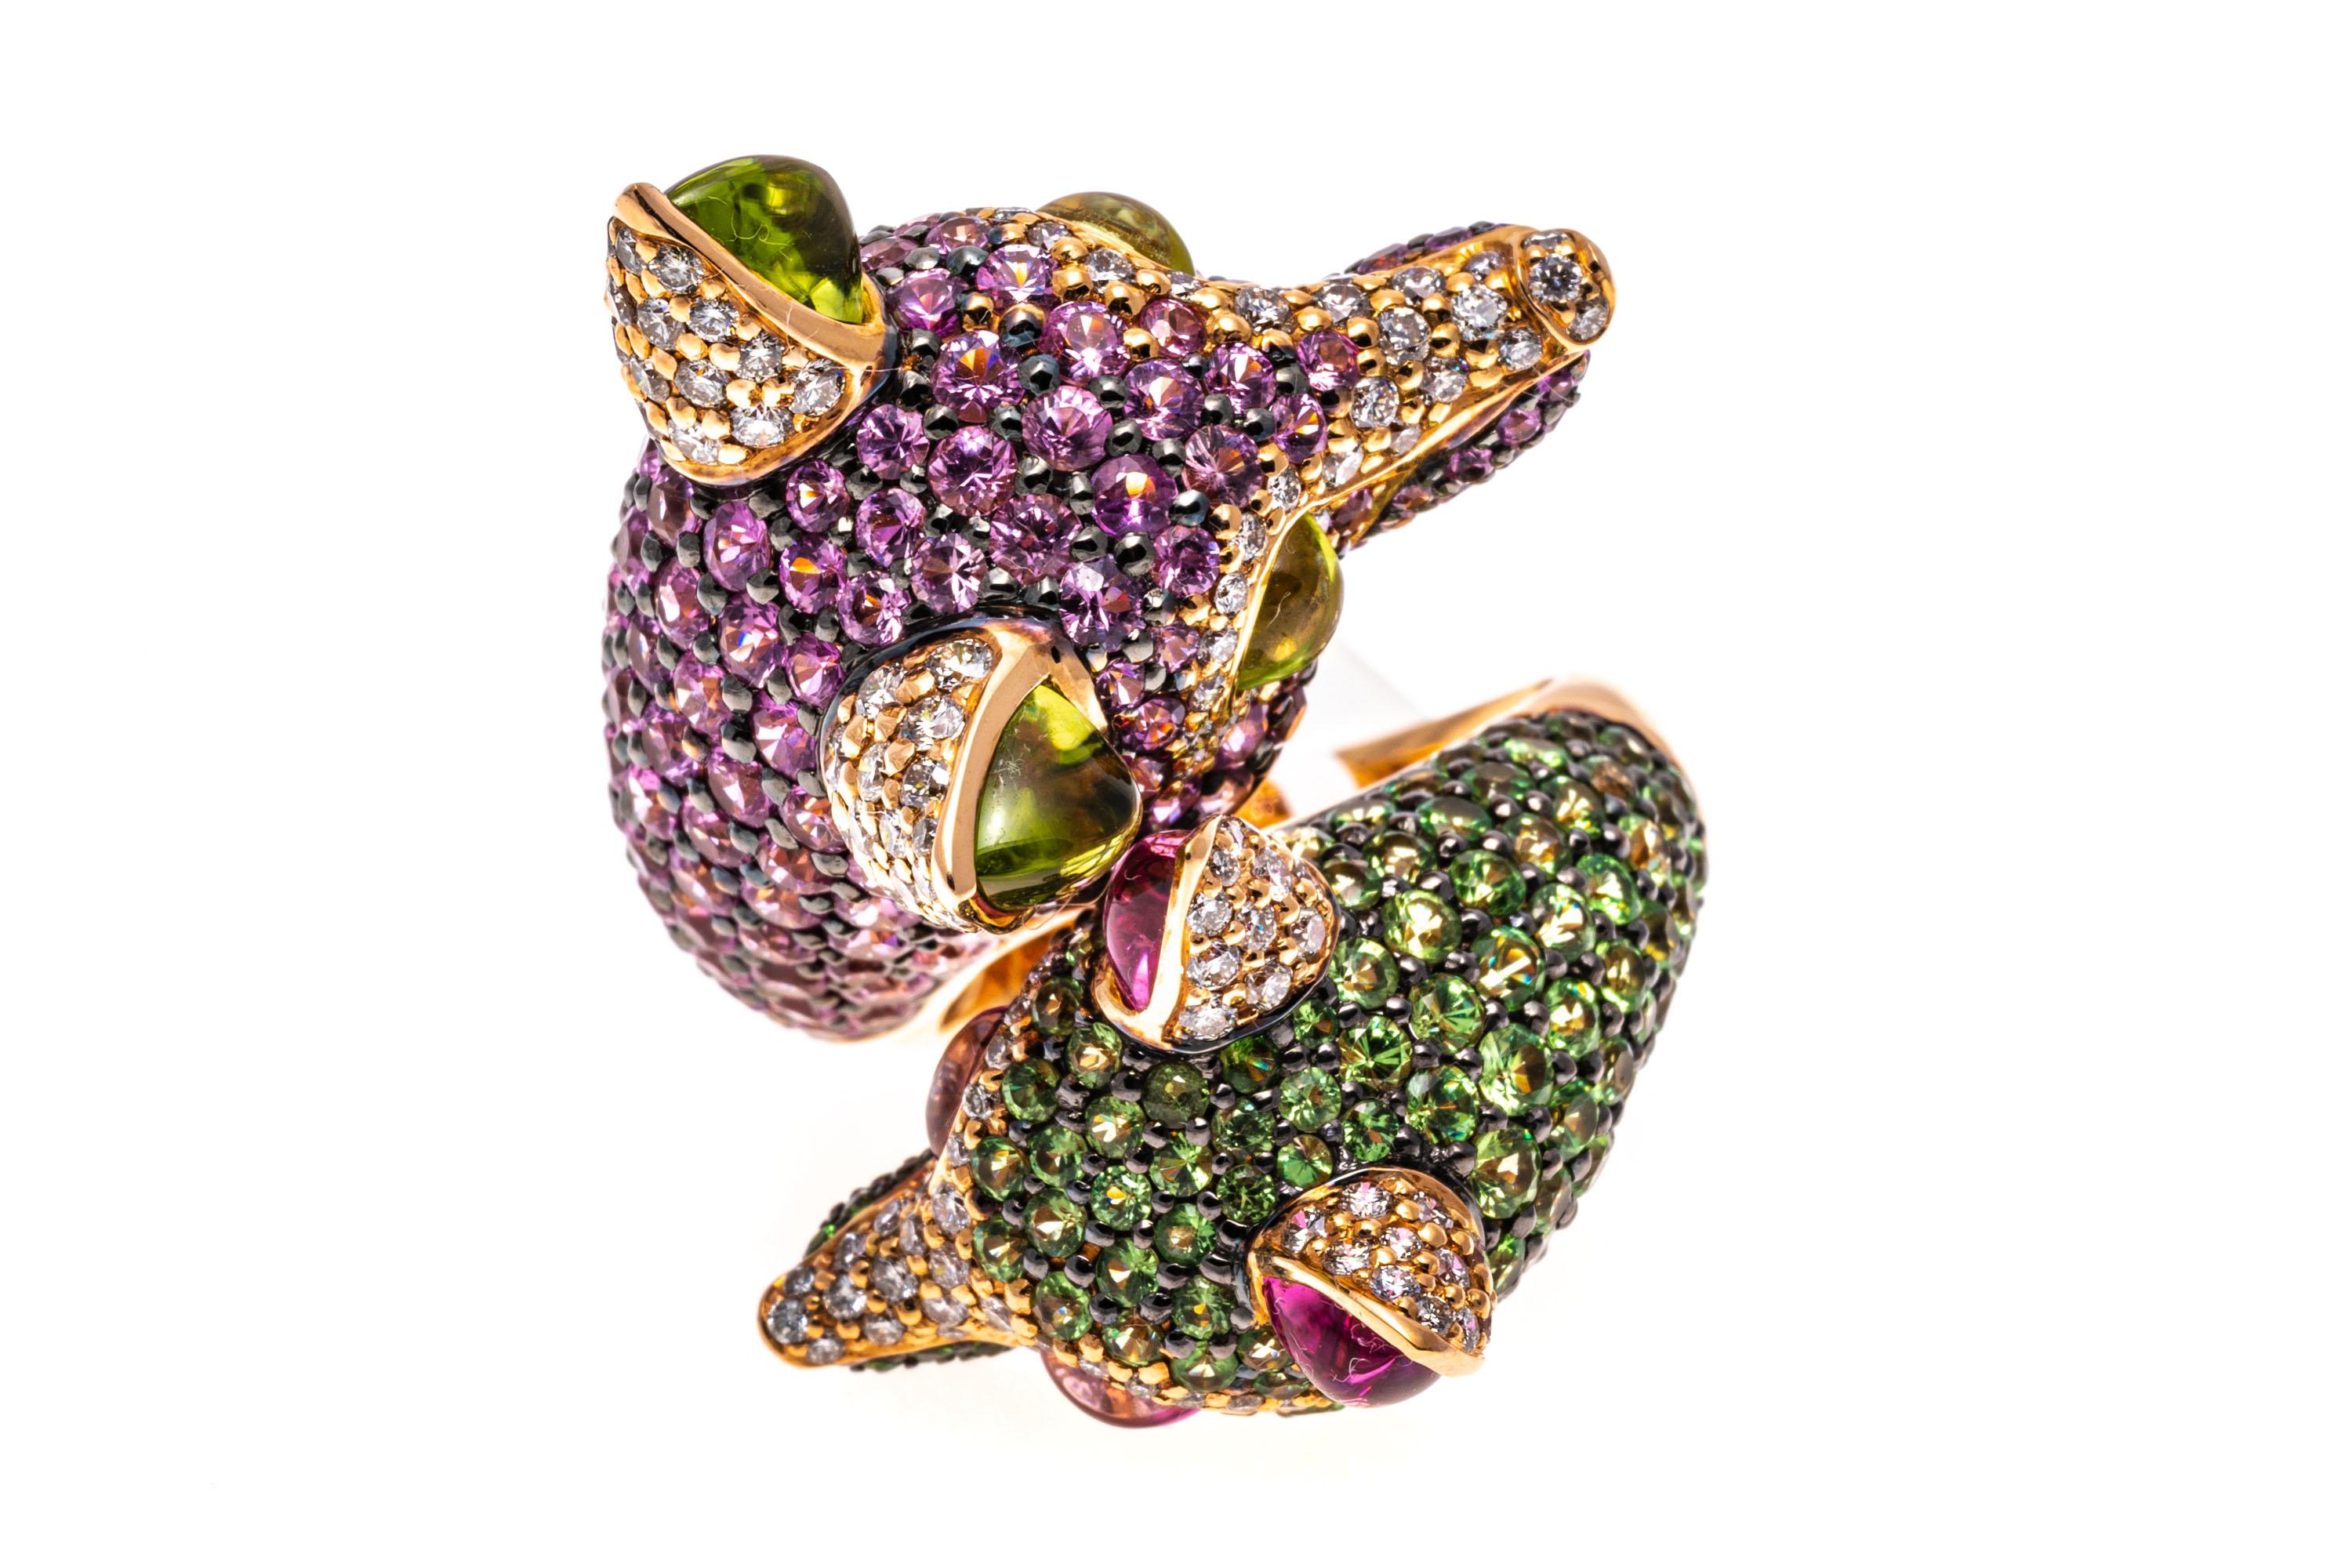 18k Rose Gold Double Fox Head Ring Set With Pink Sapphires, Diamonds, Tsavorite, Peridot.
This stunning ring is a bypass style featuring two opposing, complementary figural fox heads. The first and larger fox is pave set with round faceted, medium